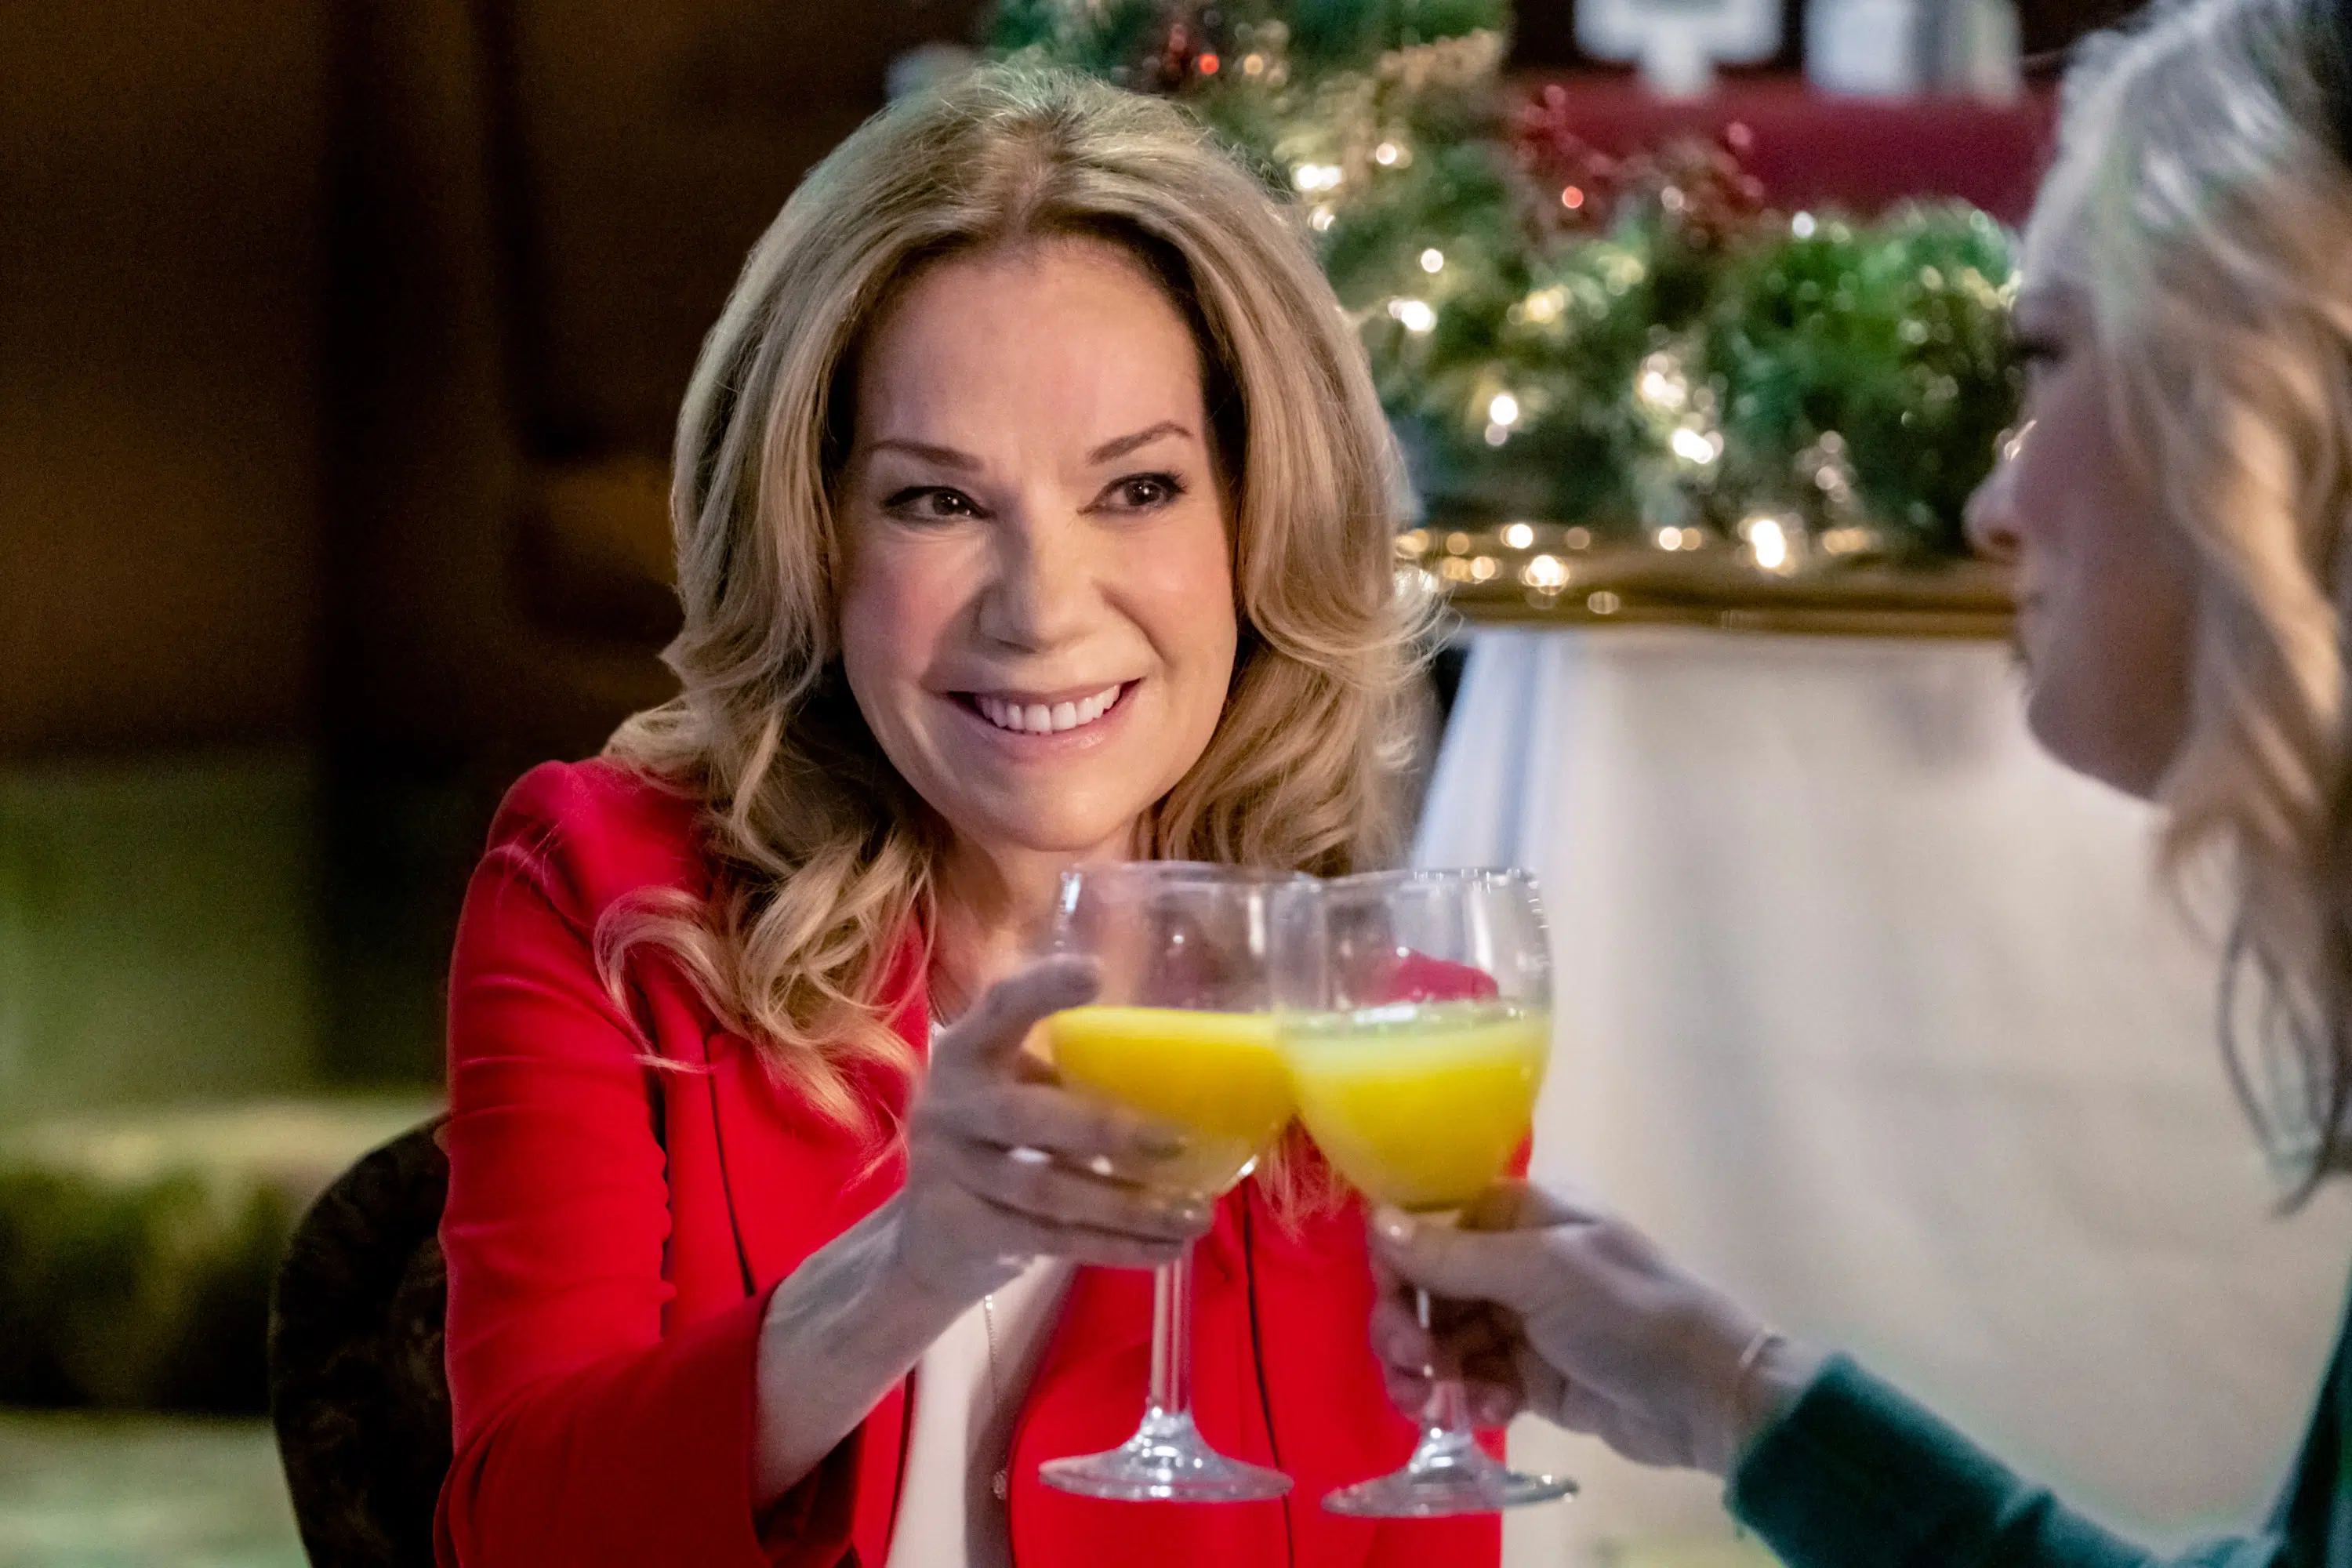 A GODWINK CHRISTMAS: MEANT FOR LOVE, Kathie Lee Gifford, (aired Nov. 15, 2019)